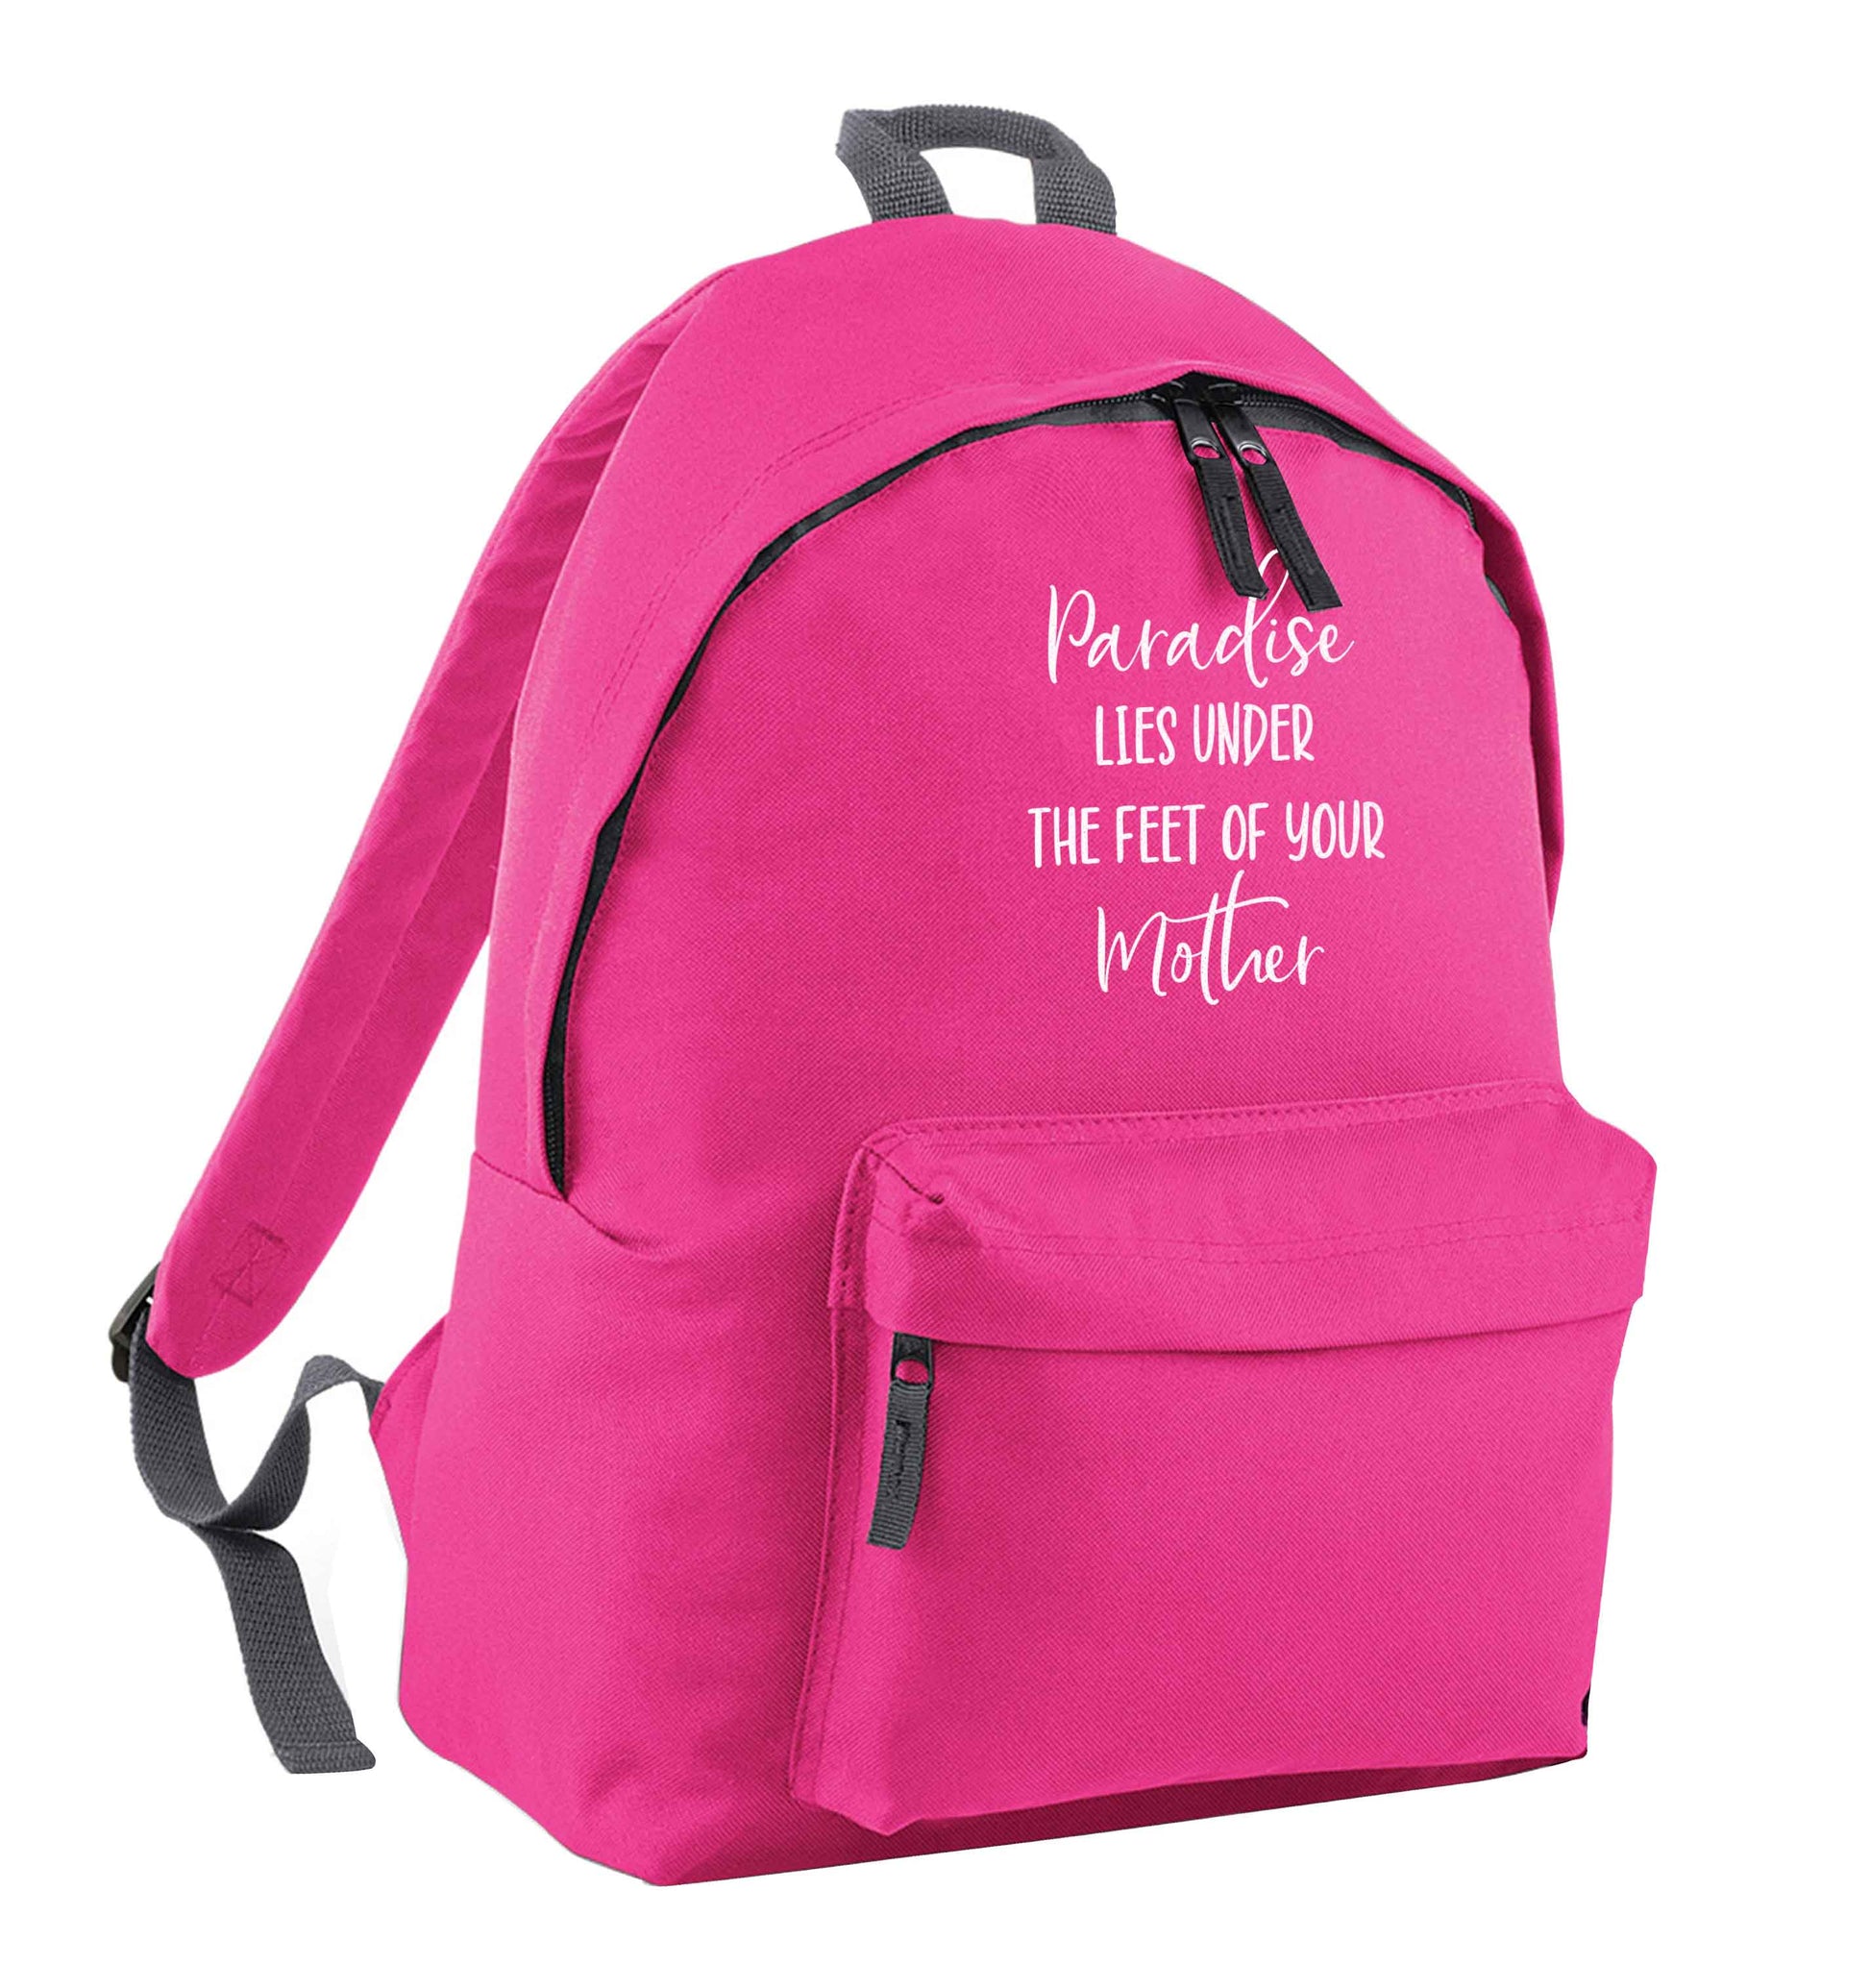 Paradise lies under the feet of your mother pink children's backpack